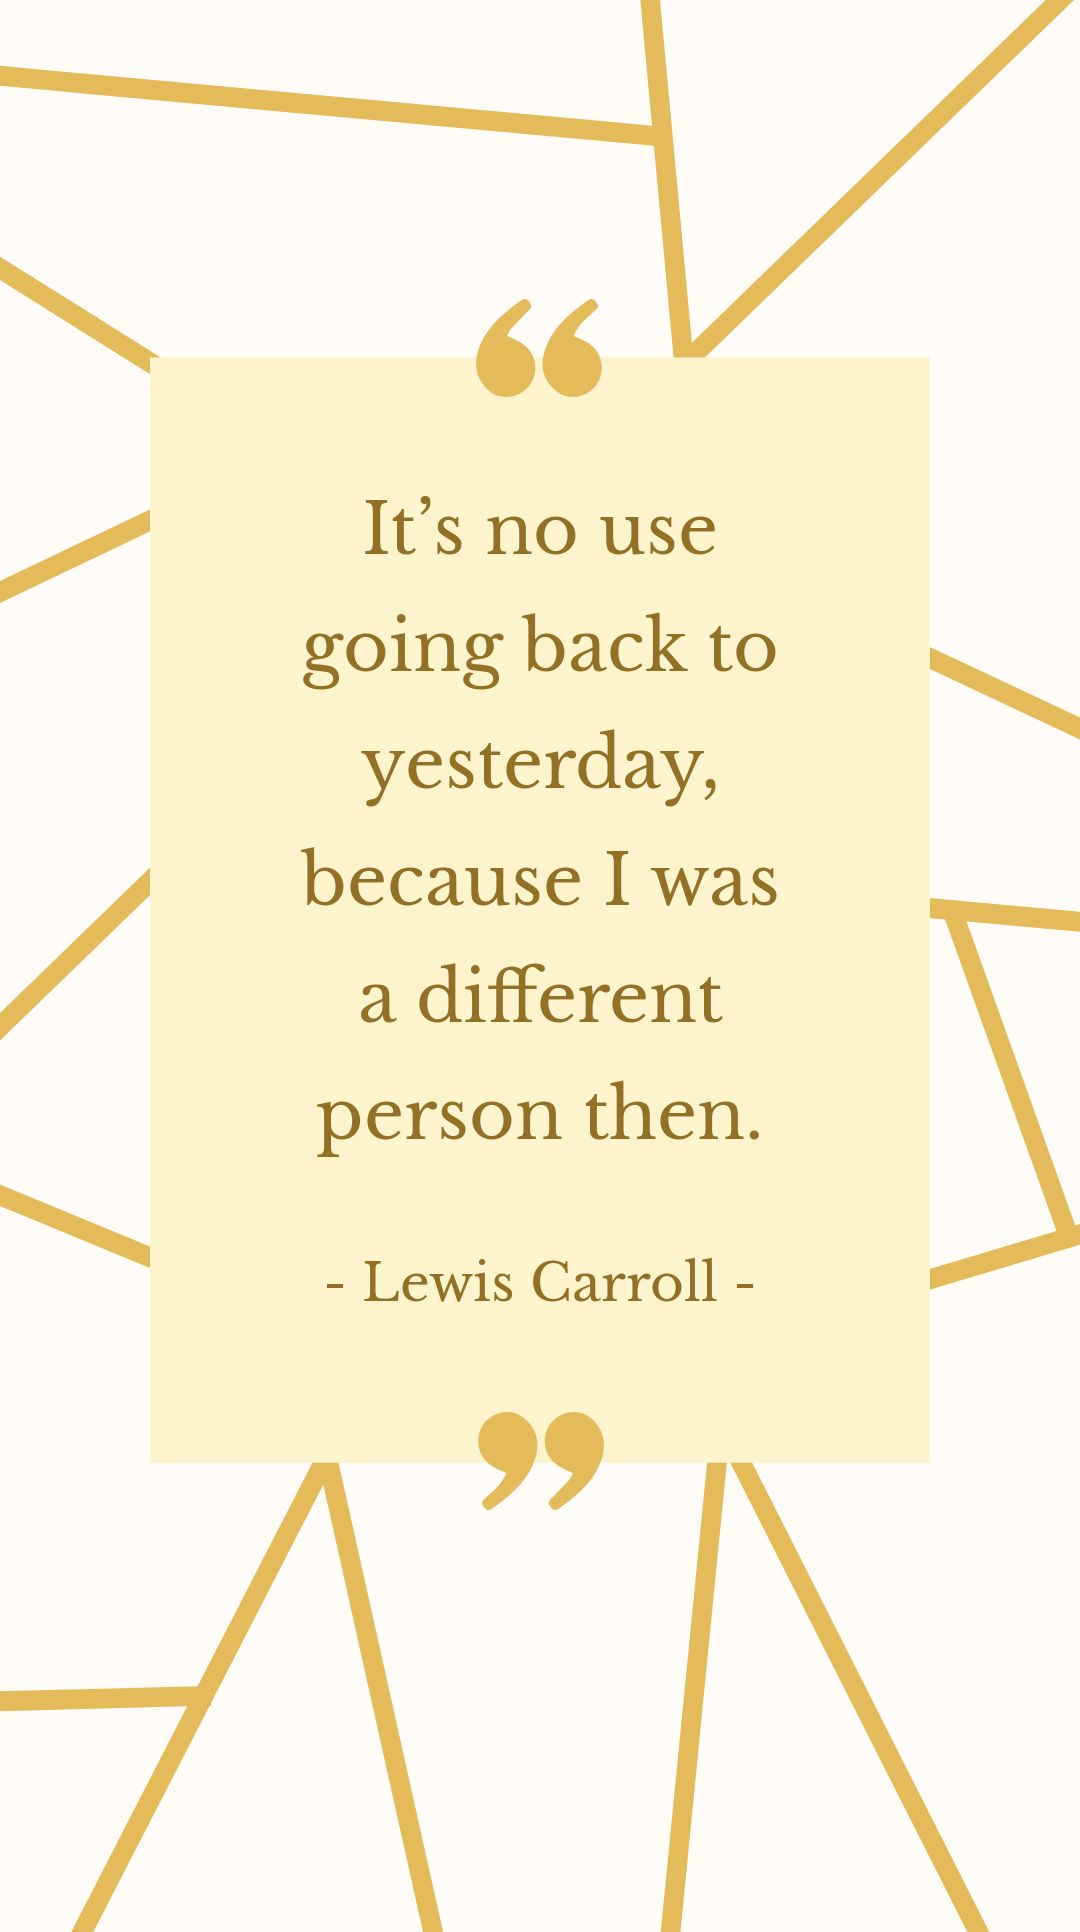 Lewis Carroll - It’s no use going back to yesterday, because I was a different person then.